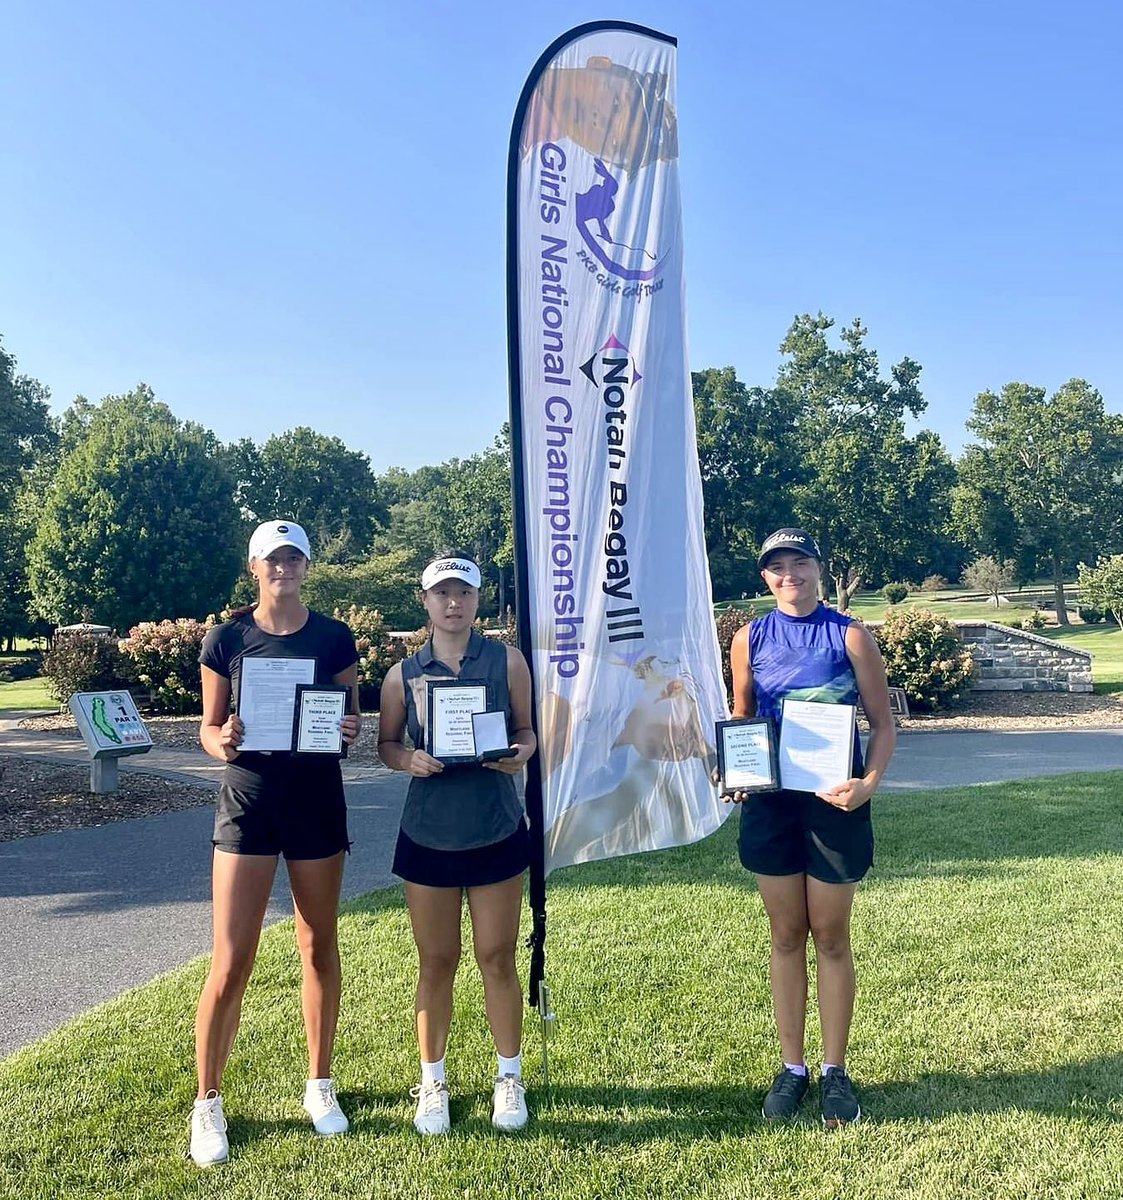 Congratulations to TRHS senior Maddie Kost who competed in the NB3/PKBGT Maryland Regional in Waynesboro, PA (August 19th & 20th). Out of 18 golfers in the 16-18 age division, she placed 2nd. 🥈💪🏼 #kentriderpride